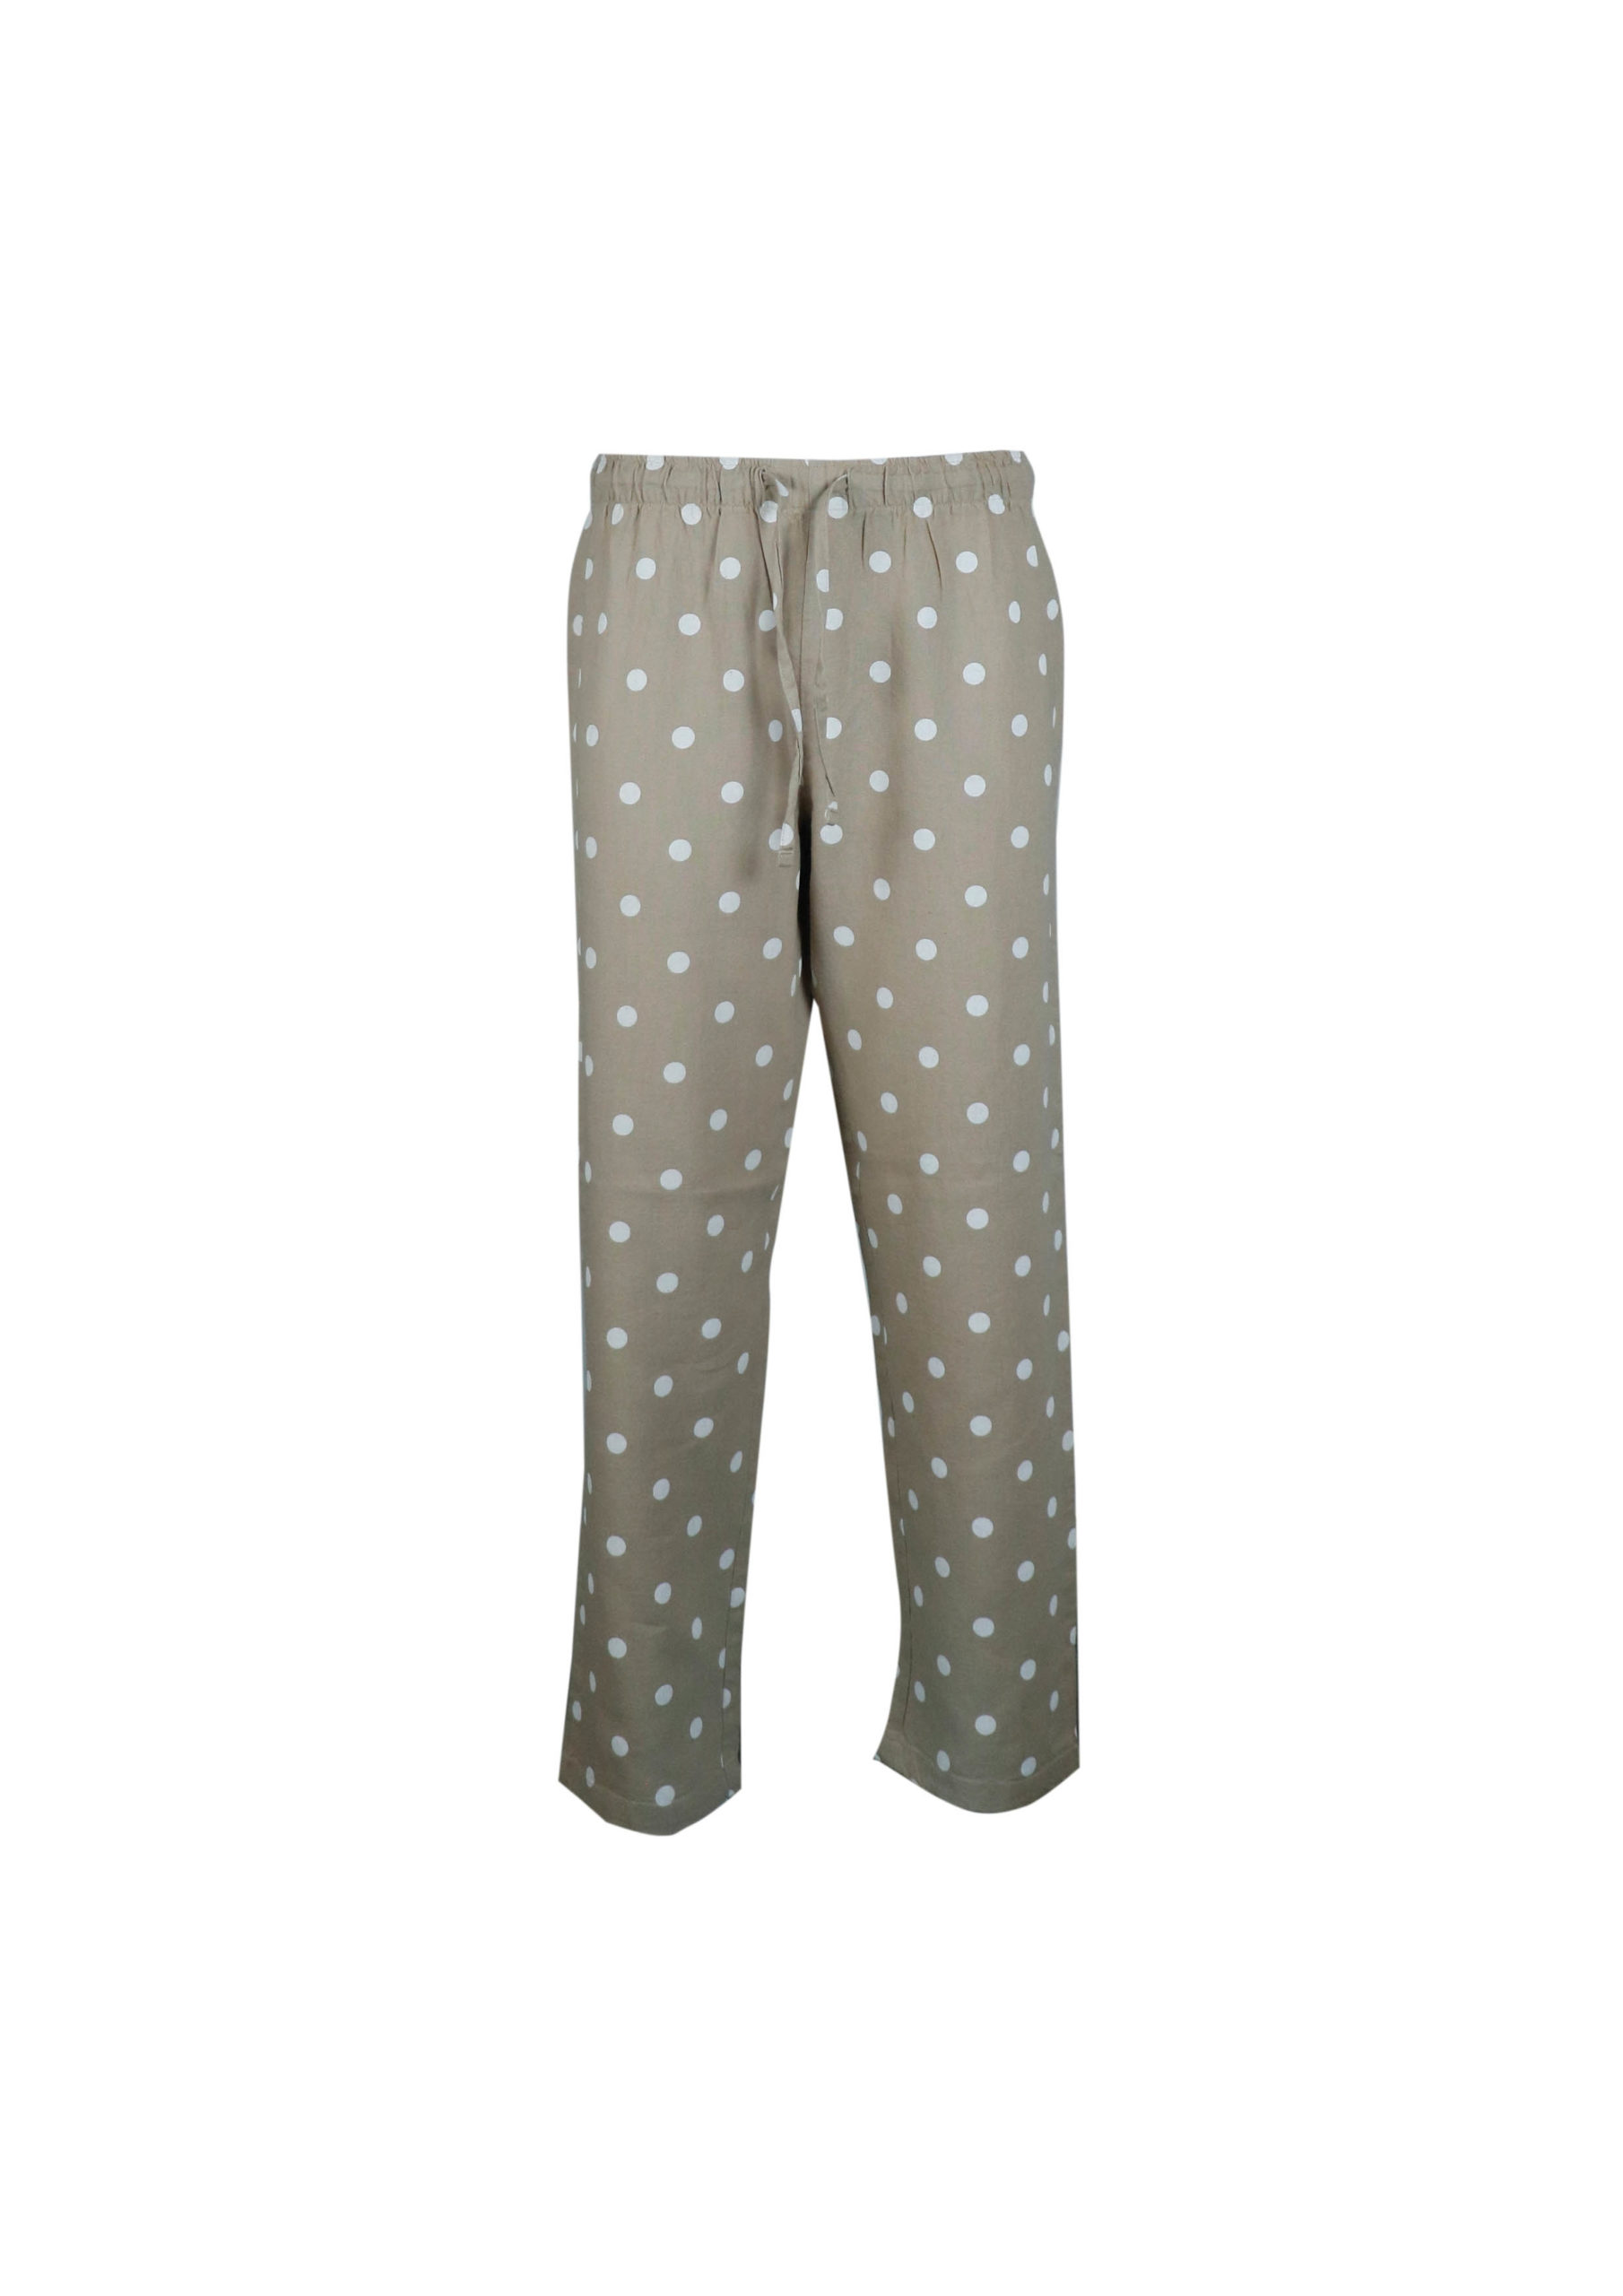 Ladies Trouser Ex. - Artisan Outfitters Ltd